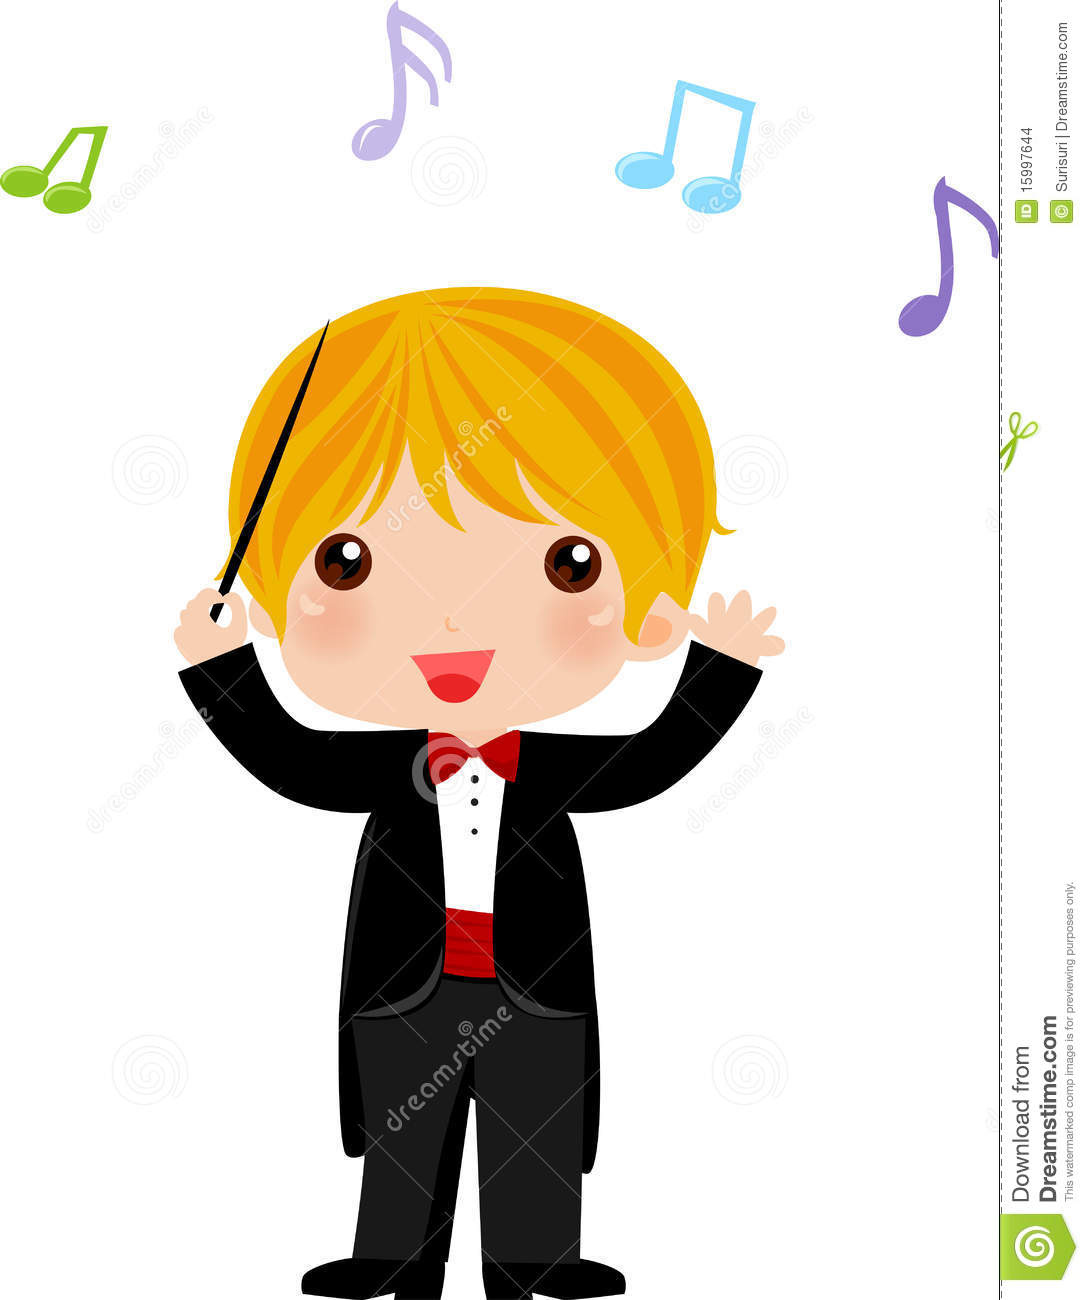 Symphony Conductor Clipart Displaying 16 Images For Symphony Conductor